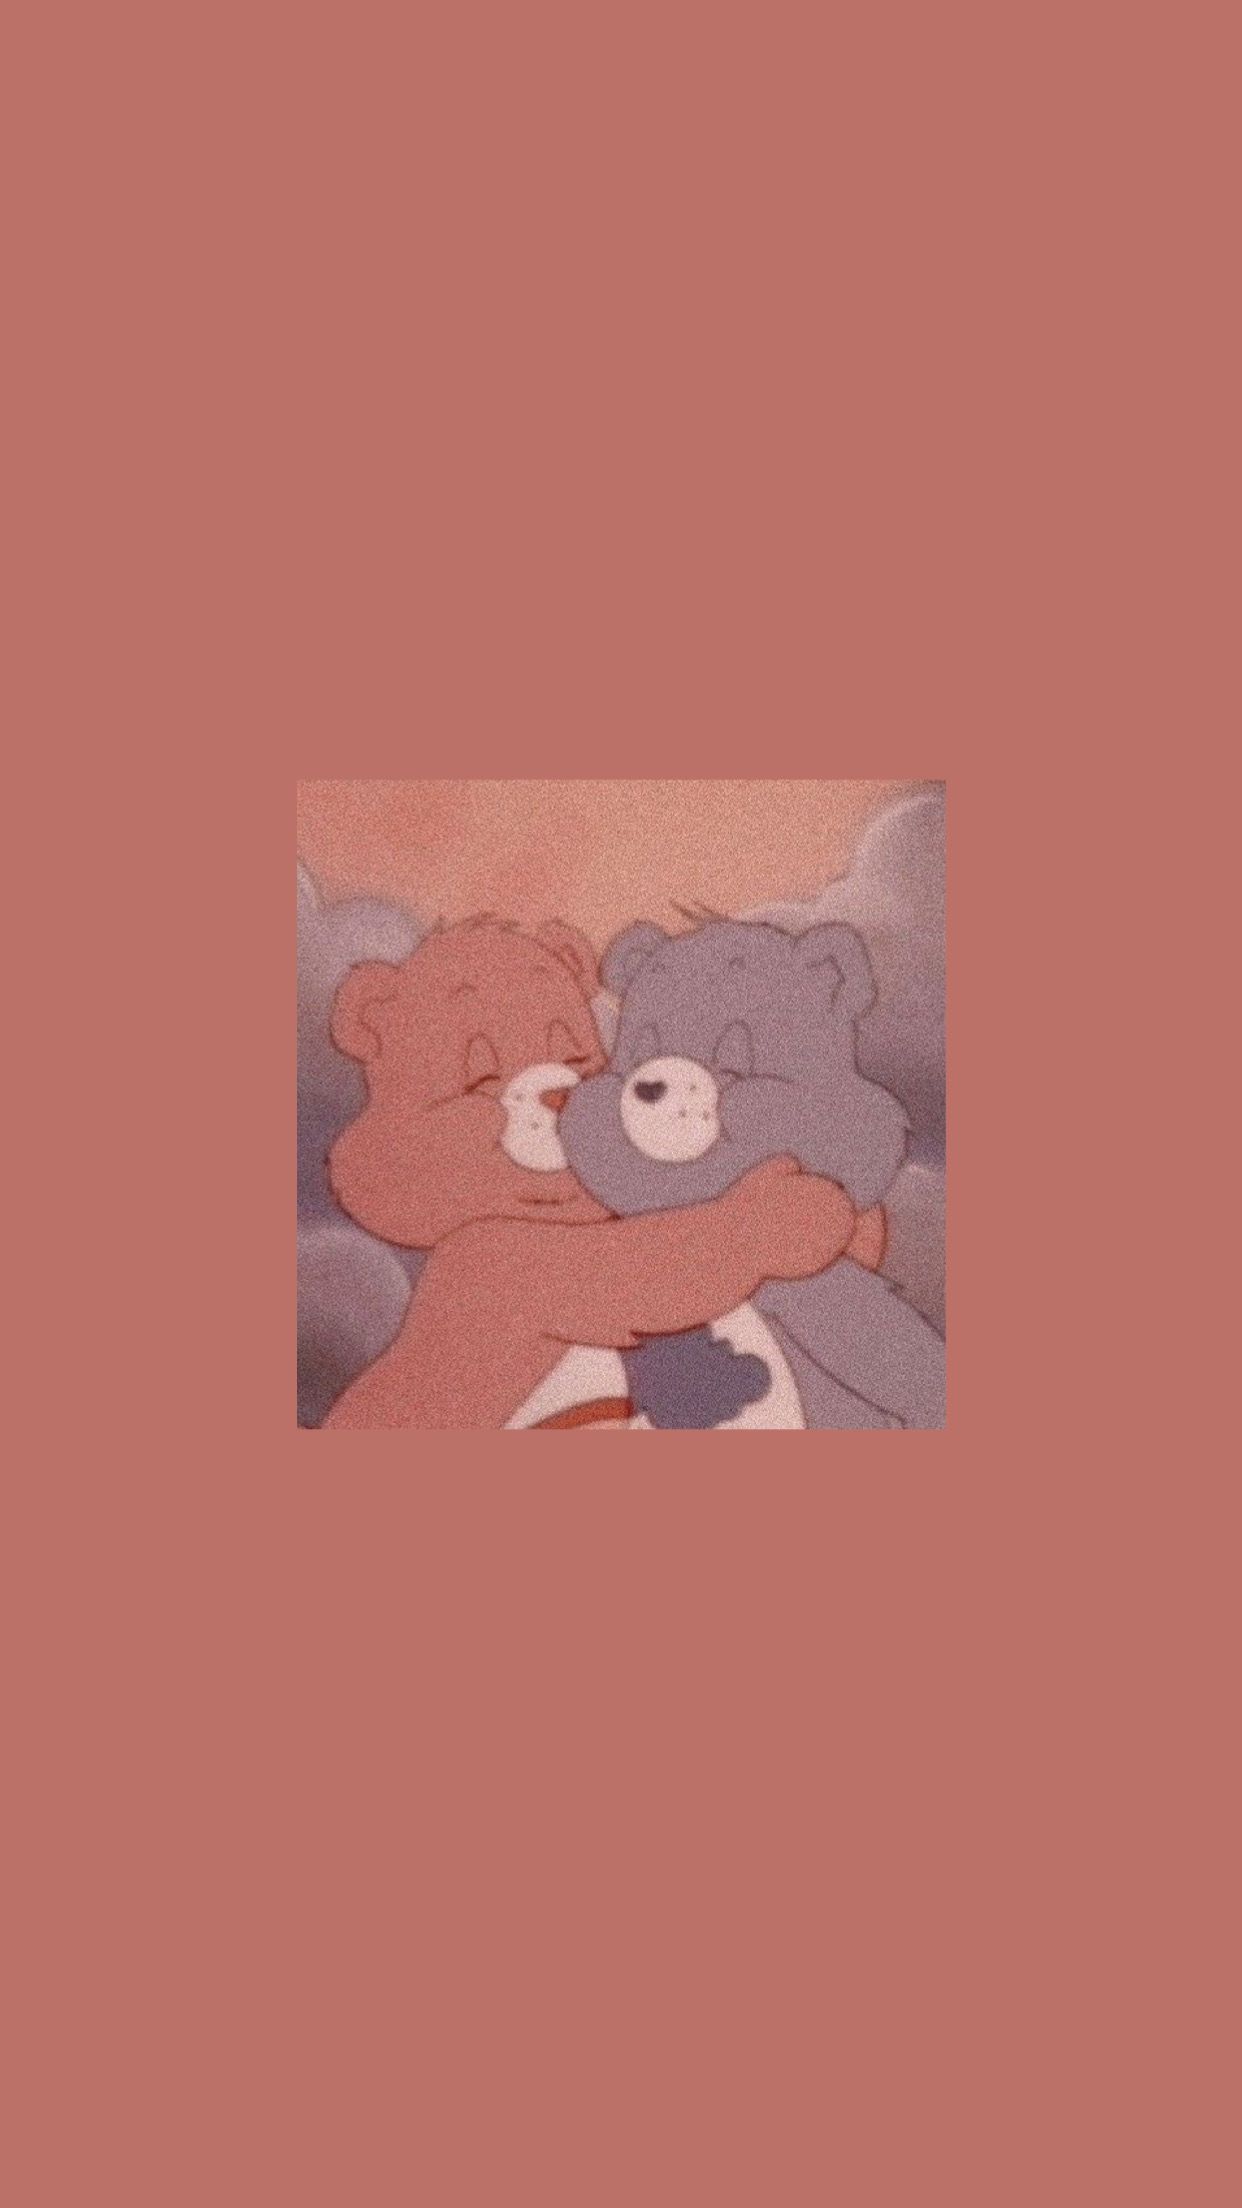 A couple of teddy bears hugging each other - Teddy bear, profile picture, Care Bears, bestie